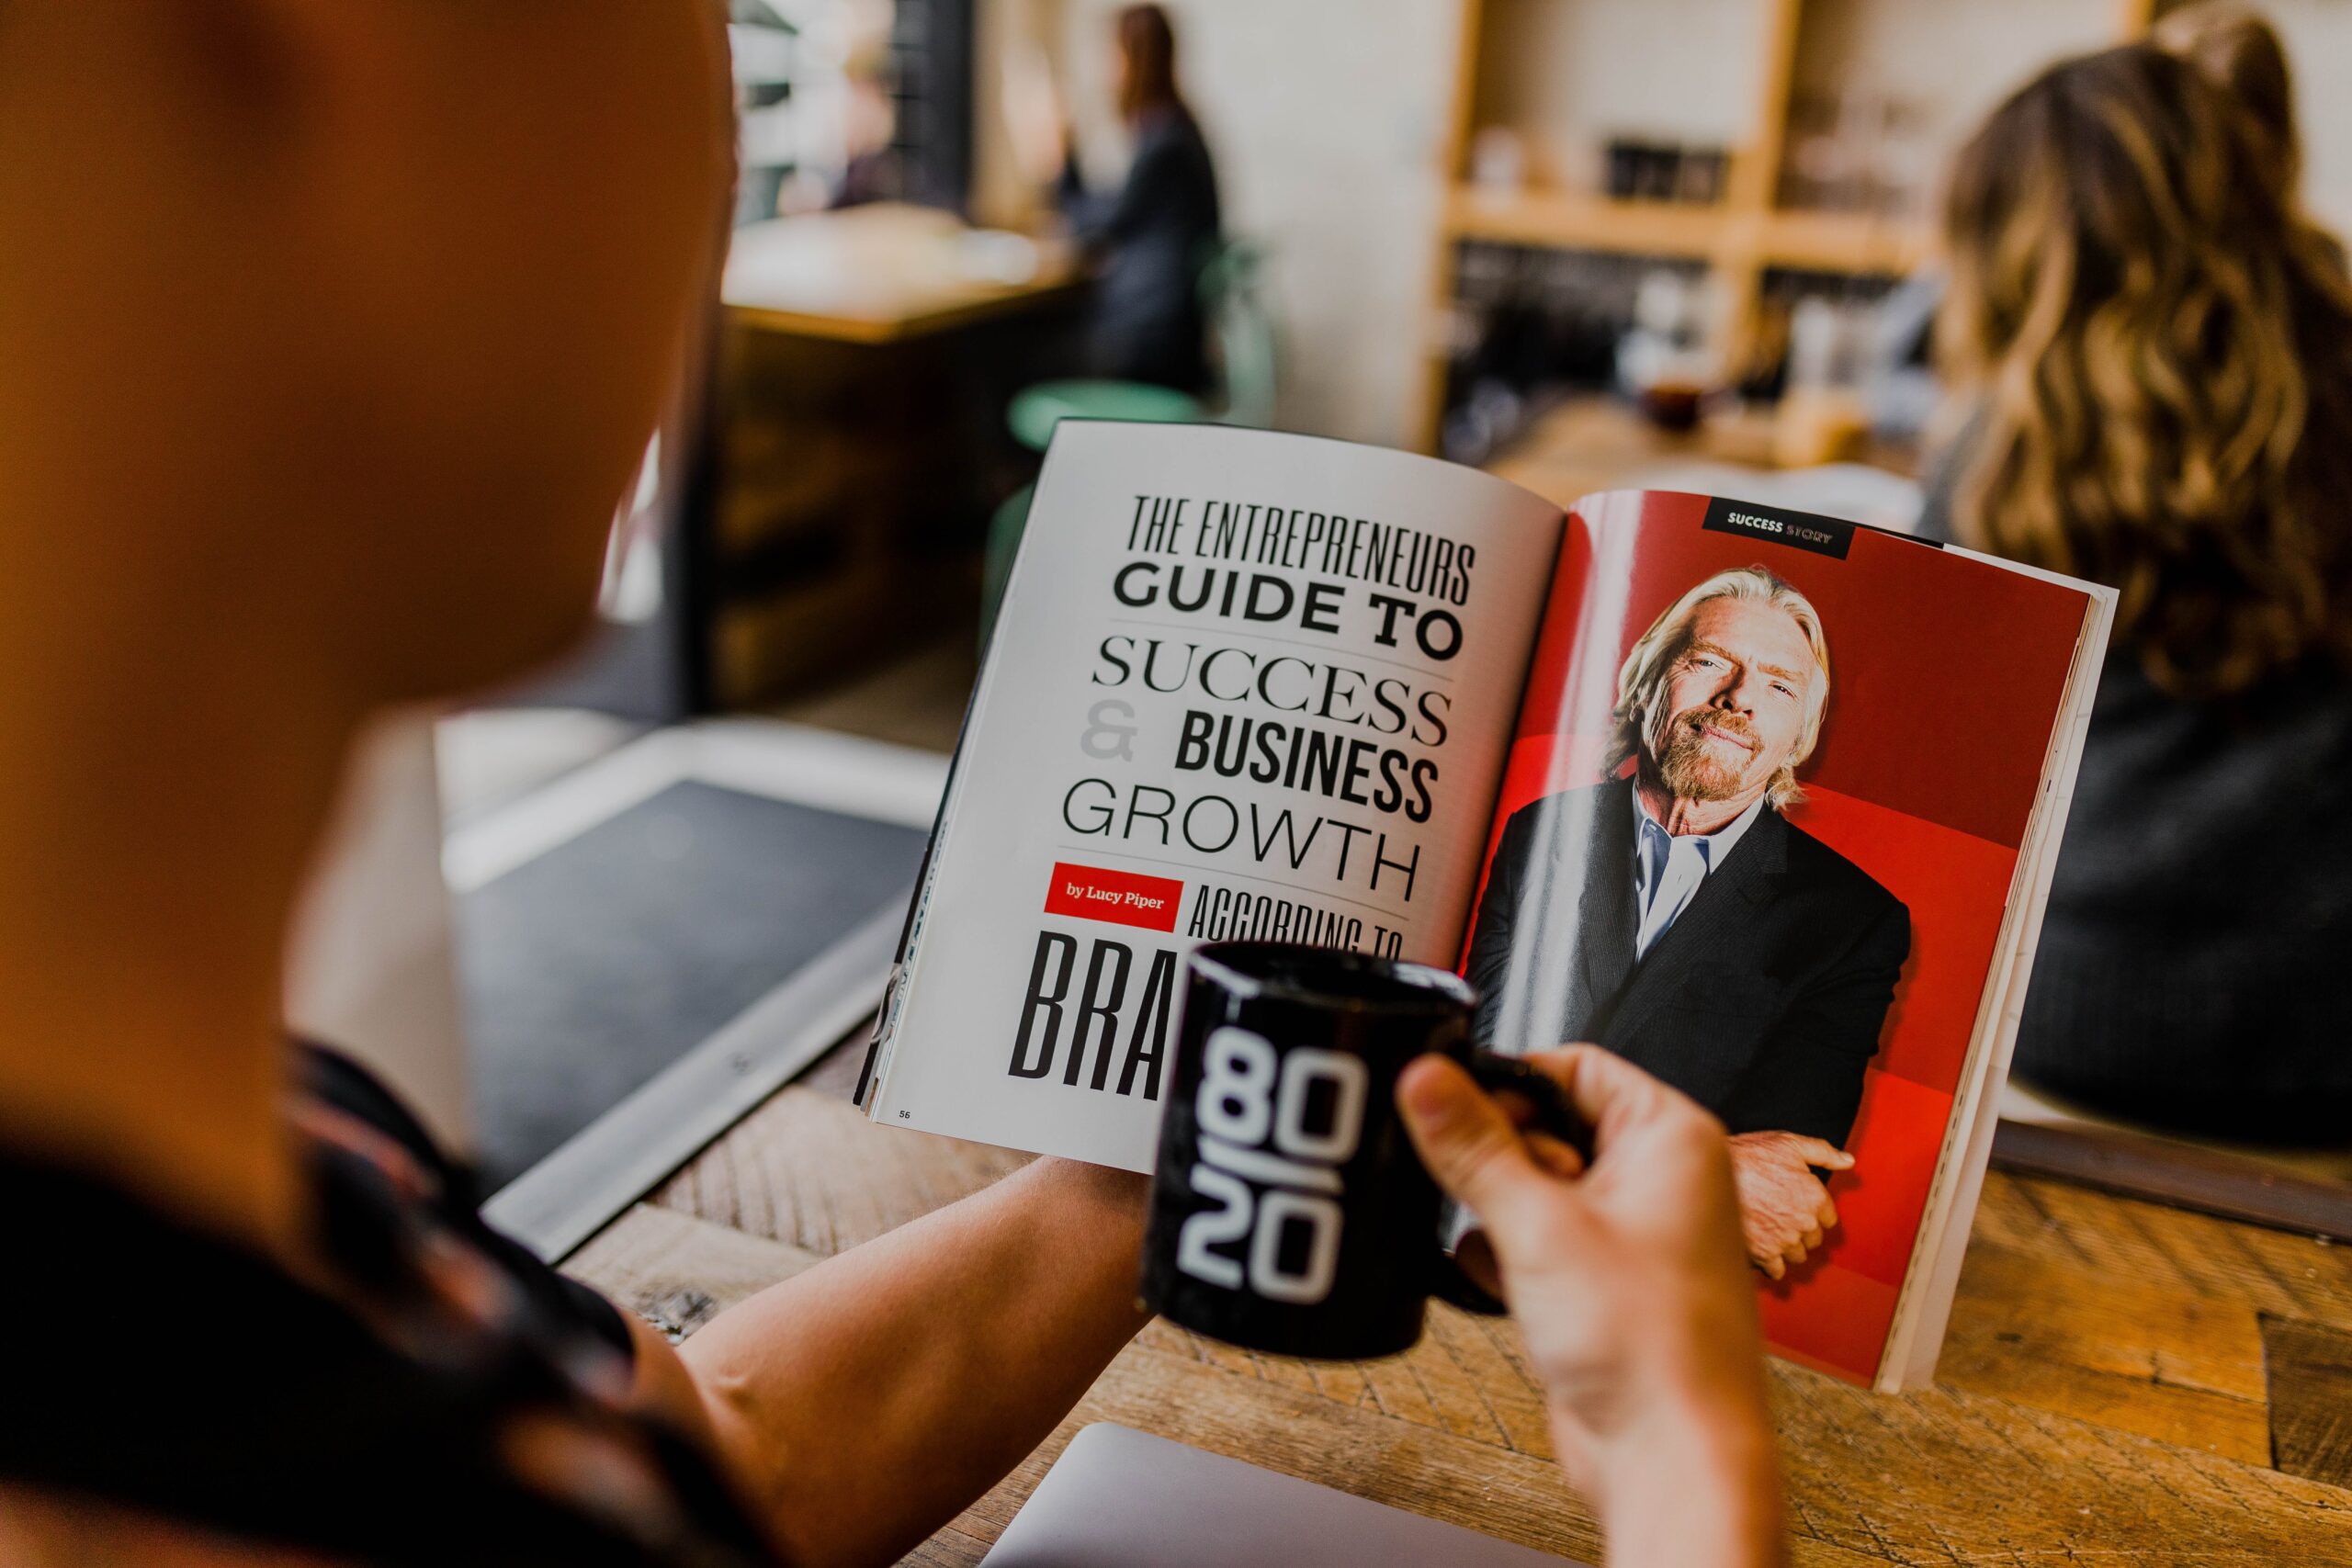 A person is holding an open book in their left hand. The book has text on the right page and a photograph of Richard Branson on the other page. The person is holding a mug in their other hand.